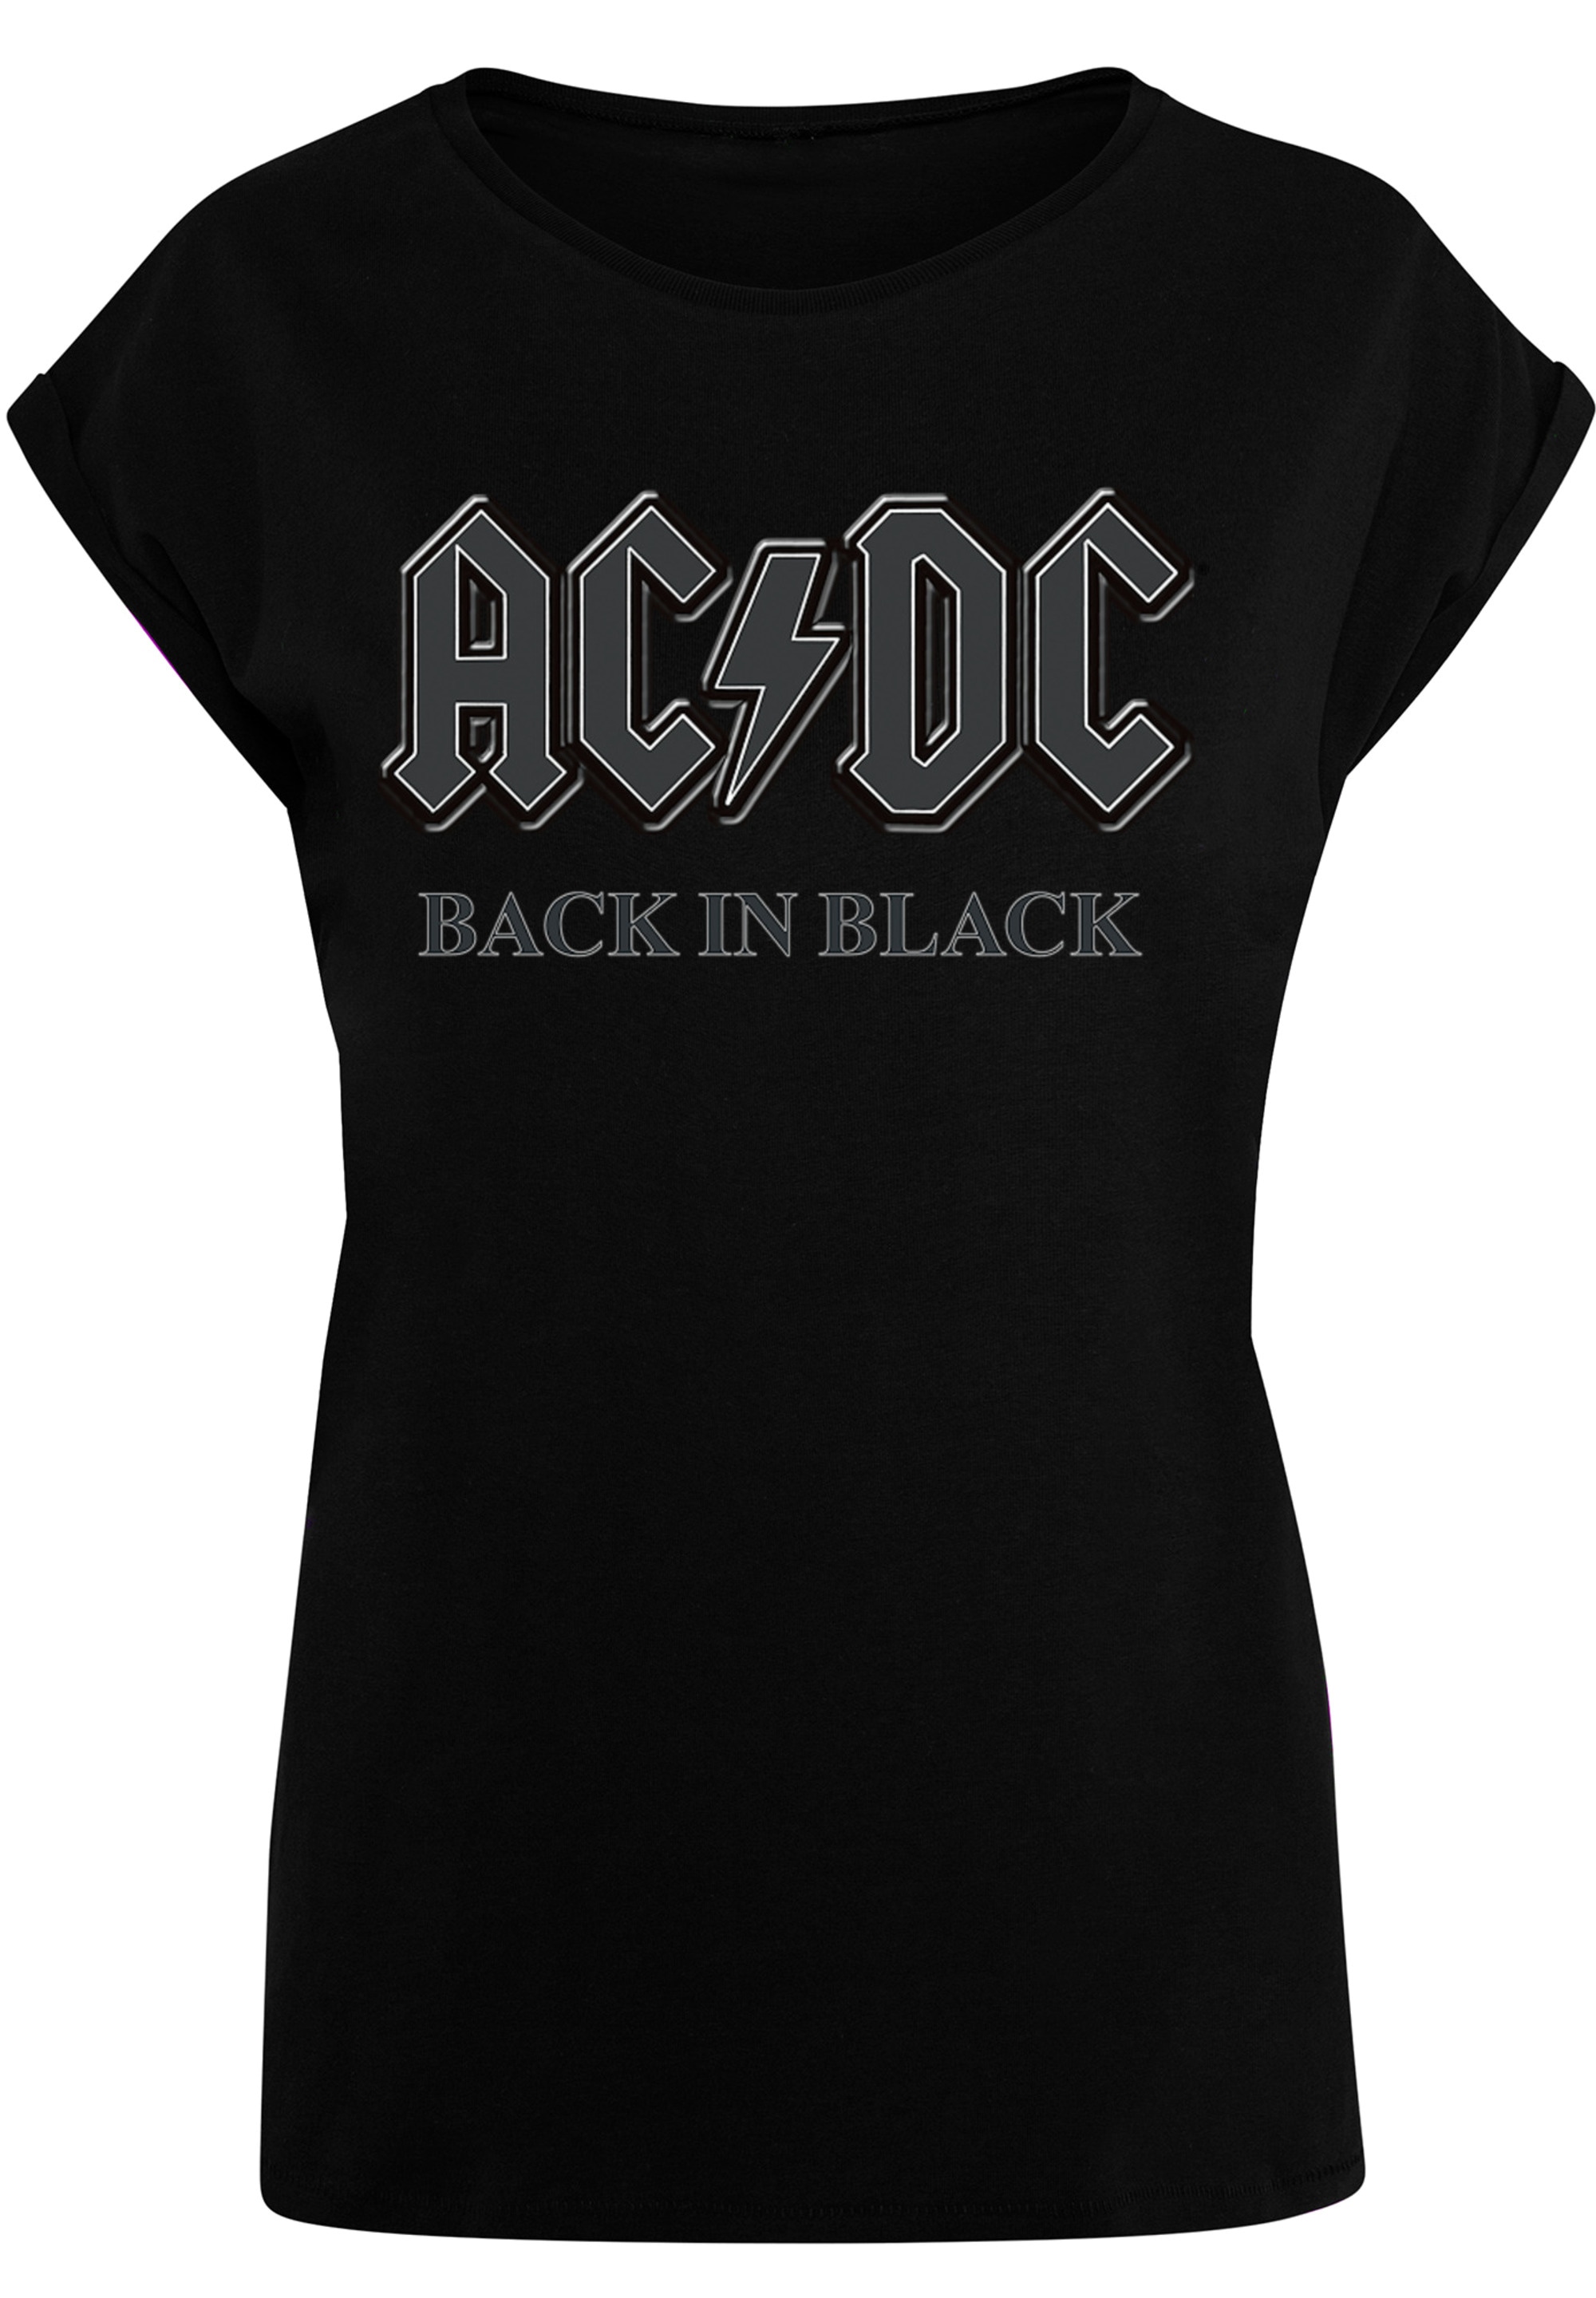 »PLUS T-Shirt Print Back SIZE ACDC F4NT4STIC in Black«, kaufen